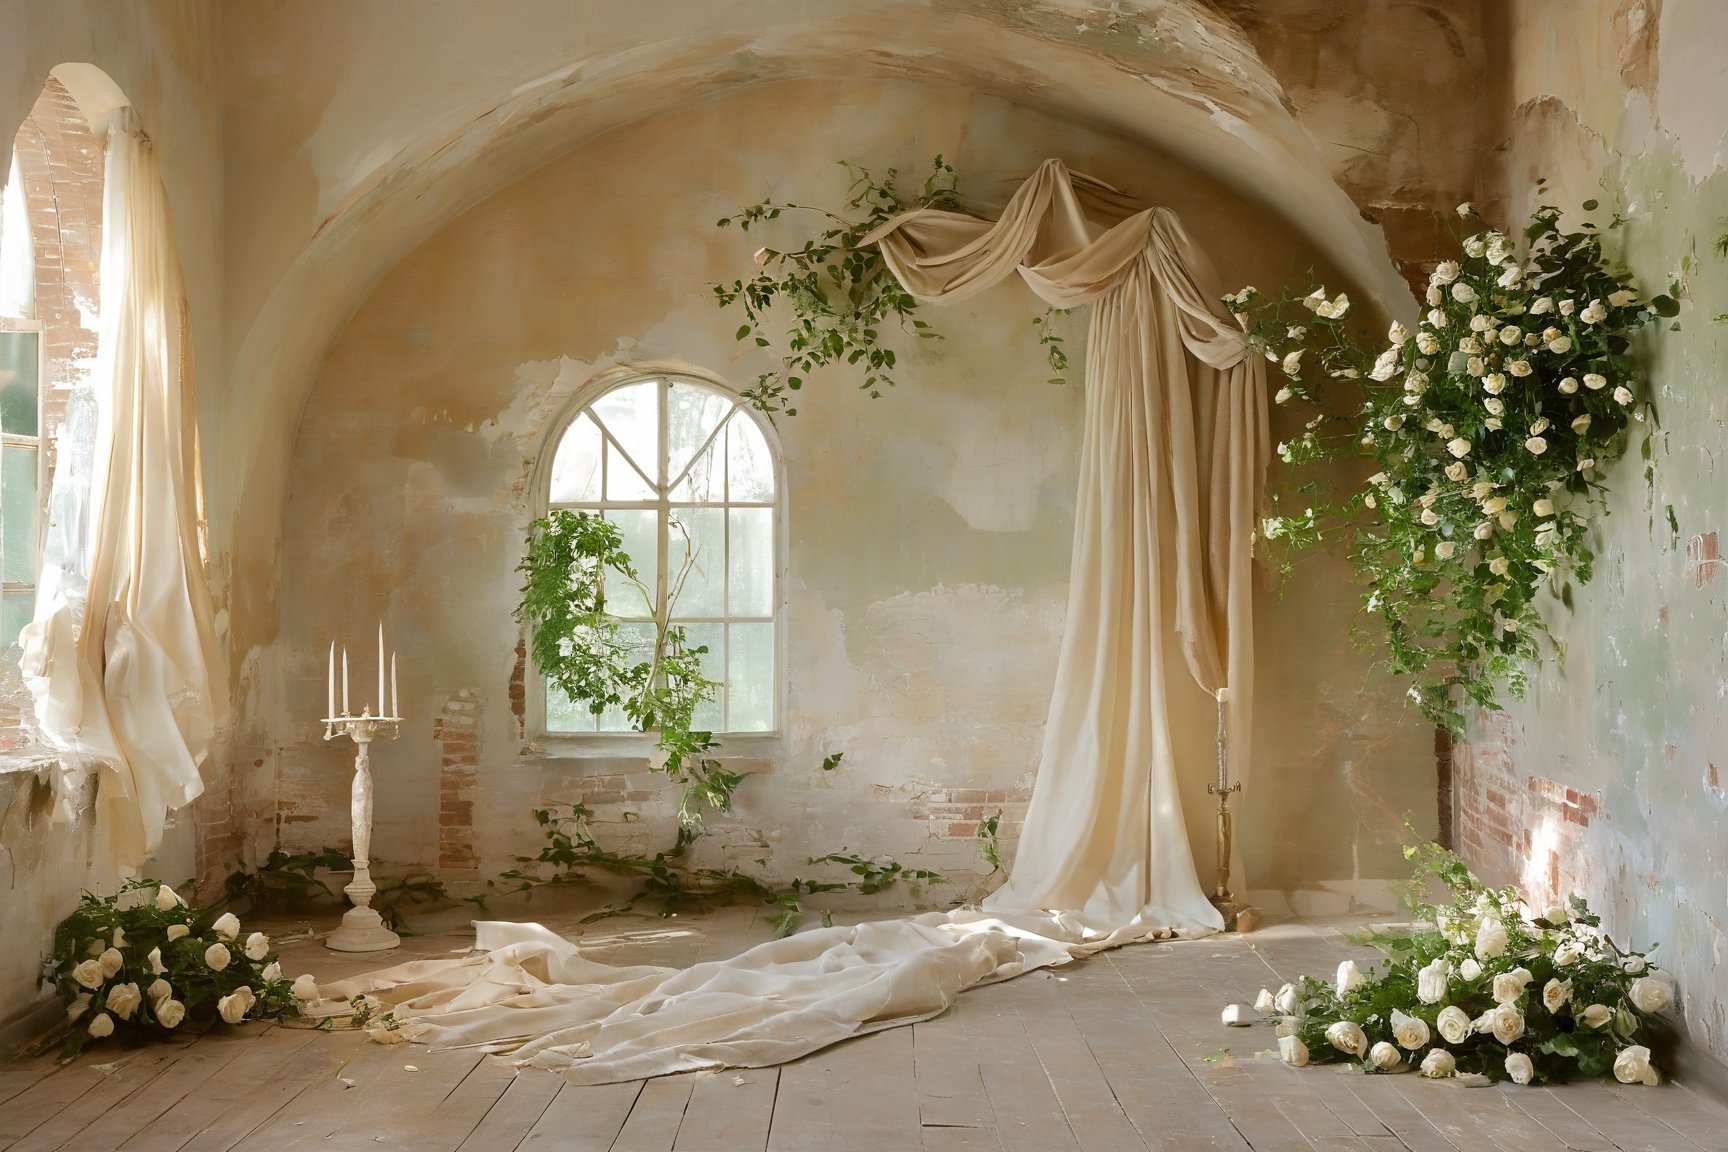 An elegantly aged room with large arched windows that let in soft sunlight. The walls are adorned with faded paint and peeling plaster, revealing the underlying brickwork. The room is filled with lush white roses and green foliage, creating a romantic and ethereal atmosphere. A draped beige curtain hangs on one side, and a vintage candelabra with tall candles stands in the foreground. Petals from the roses scatter on the worn wooden floor, adding to the dreamy ambiance.